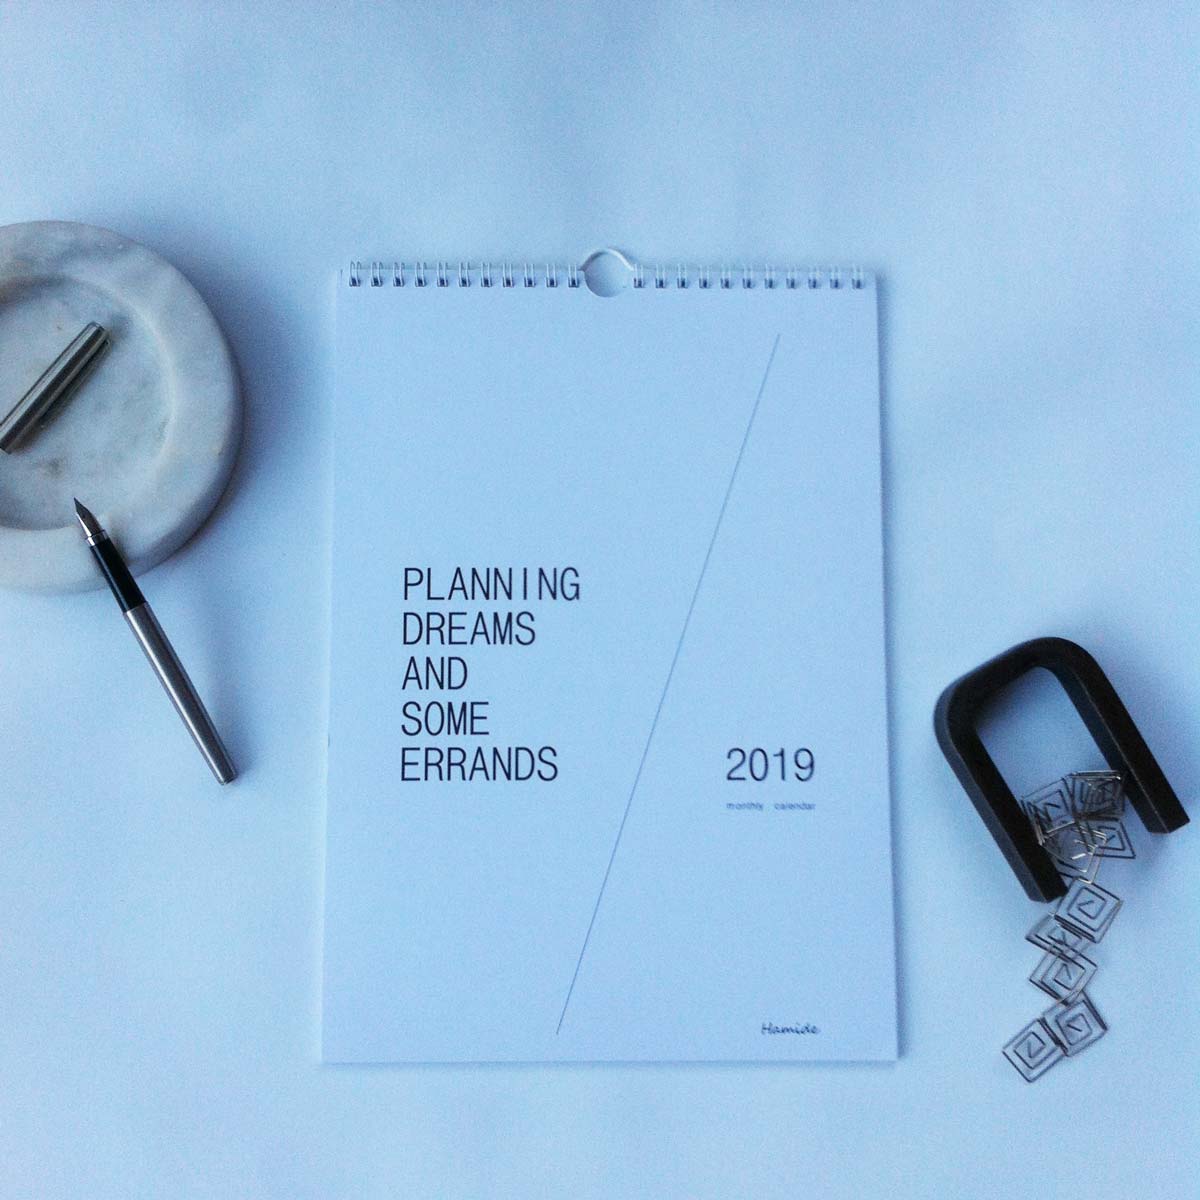 Cover of "Planning Dreams and Some Errands_2019" monthly calendar